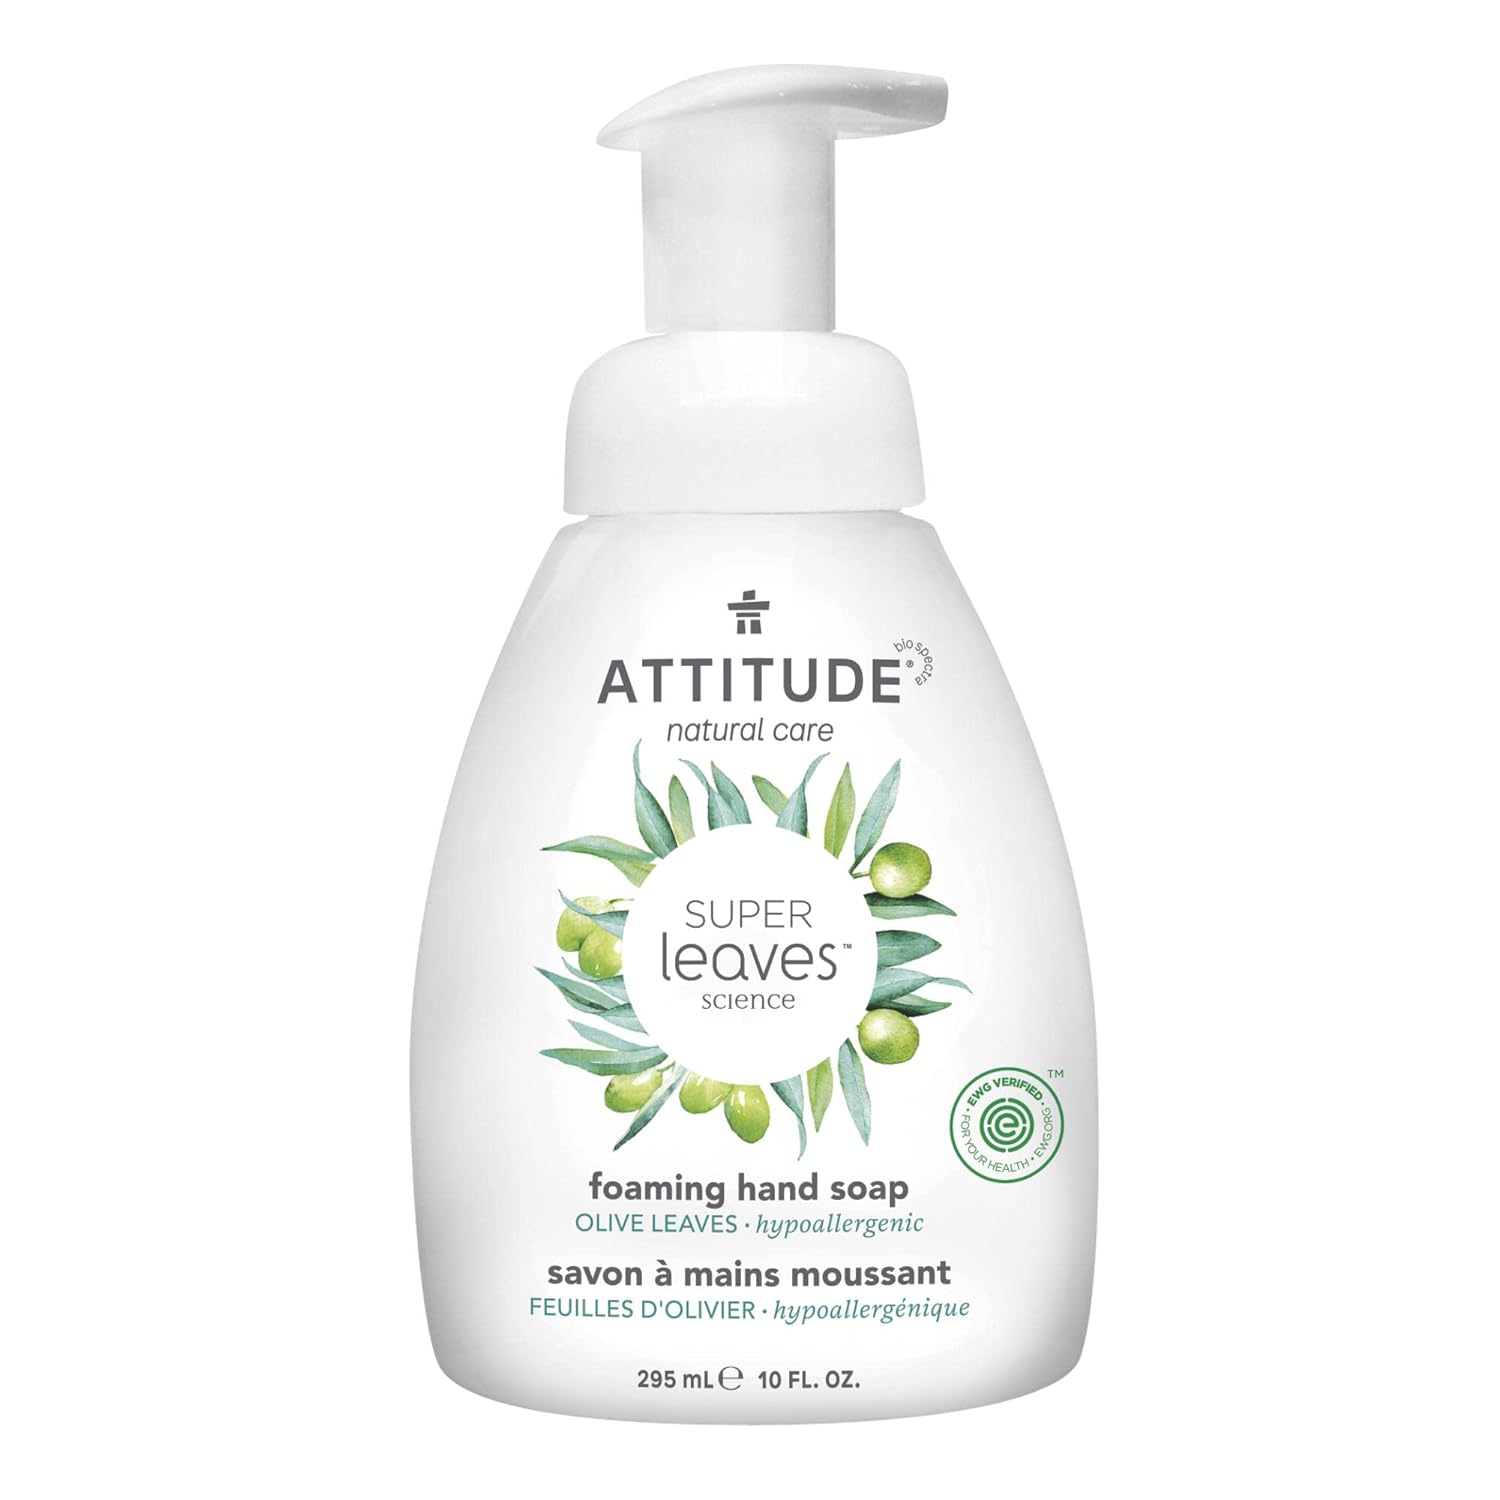 ATTITUDE Foaming Hand Soap, EWG Verified, Dermatologically Tested, Plant and Mineral-Based, Vegan Personal Care Products, Olive Leaves, 10 Fl Oz